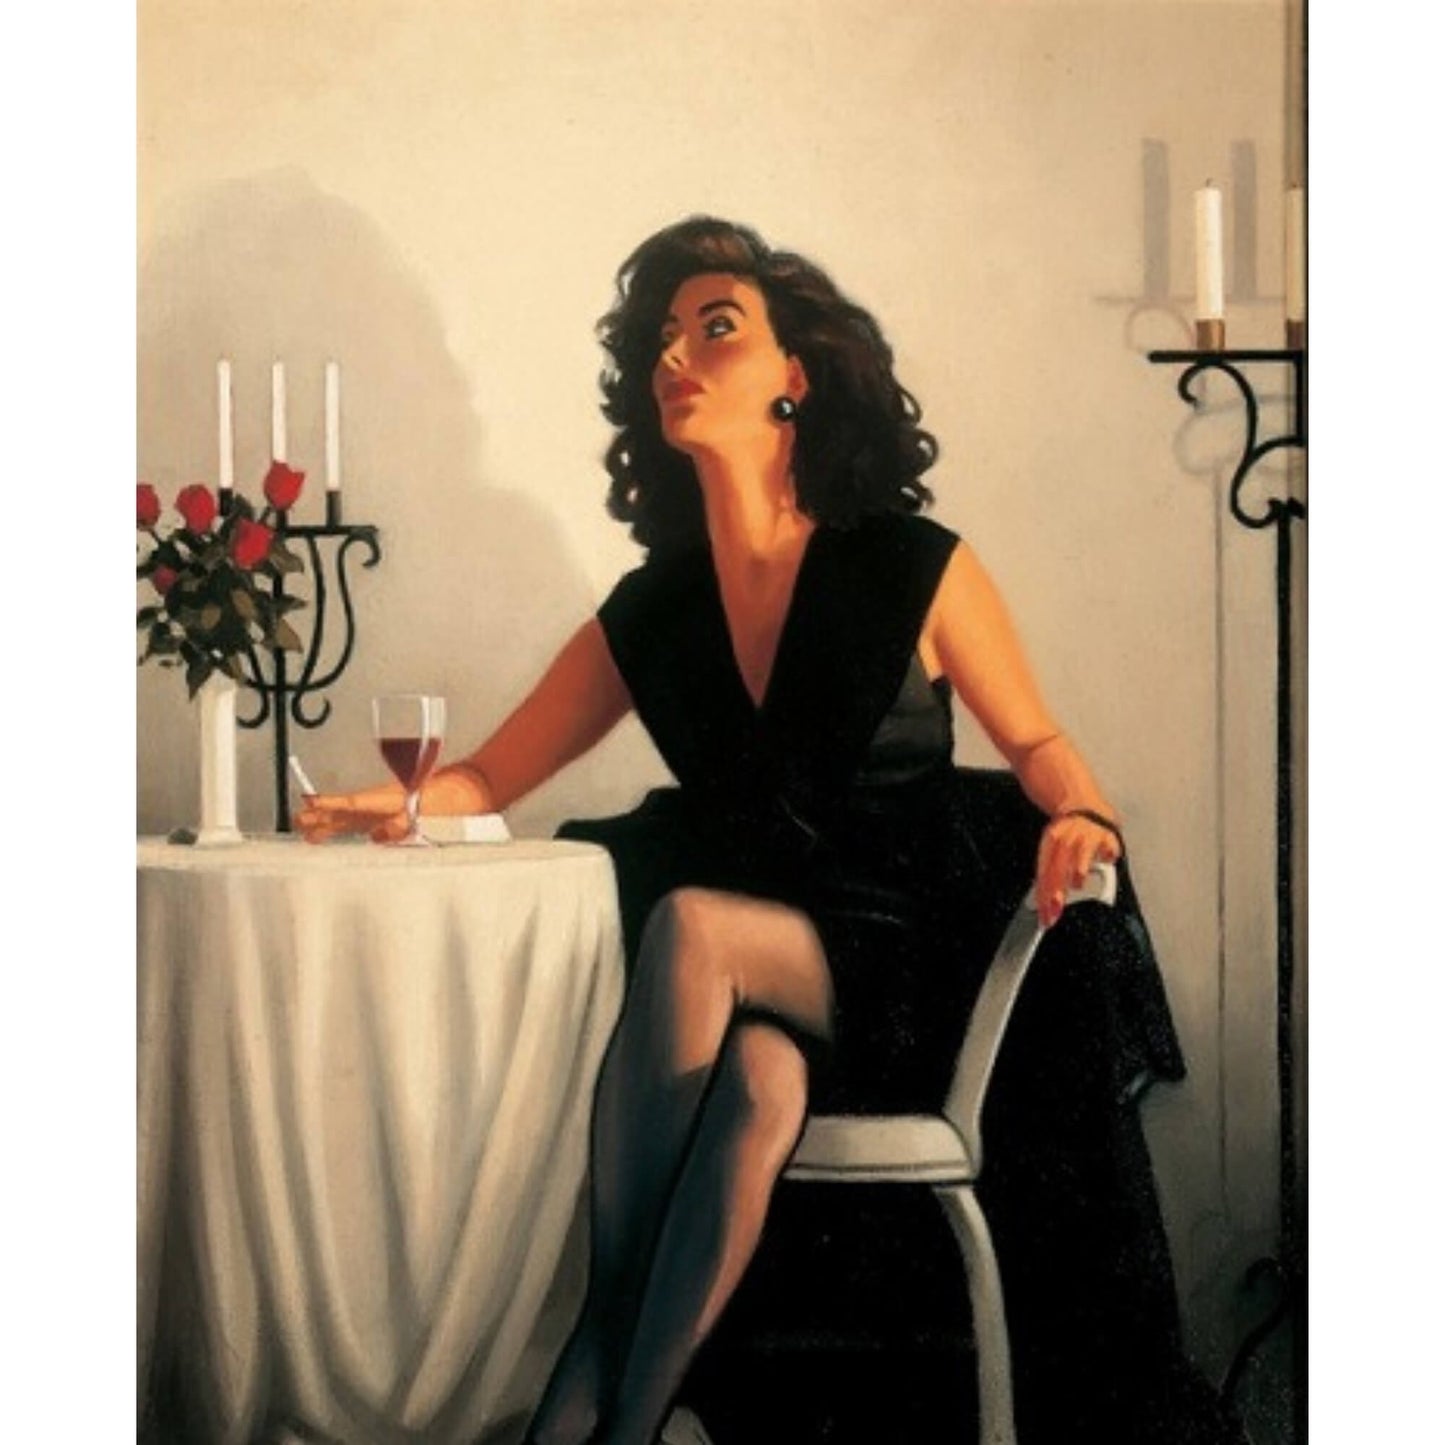 Table For One Affairs of the Heart Jack Vettriano